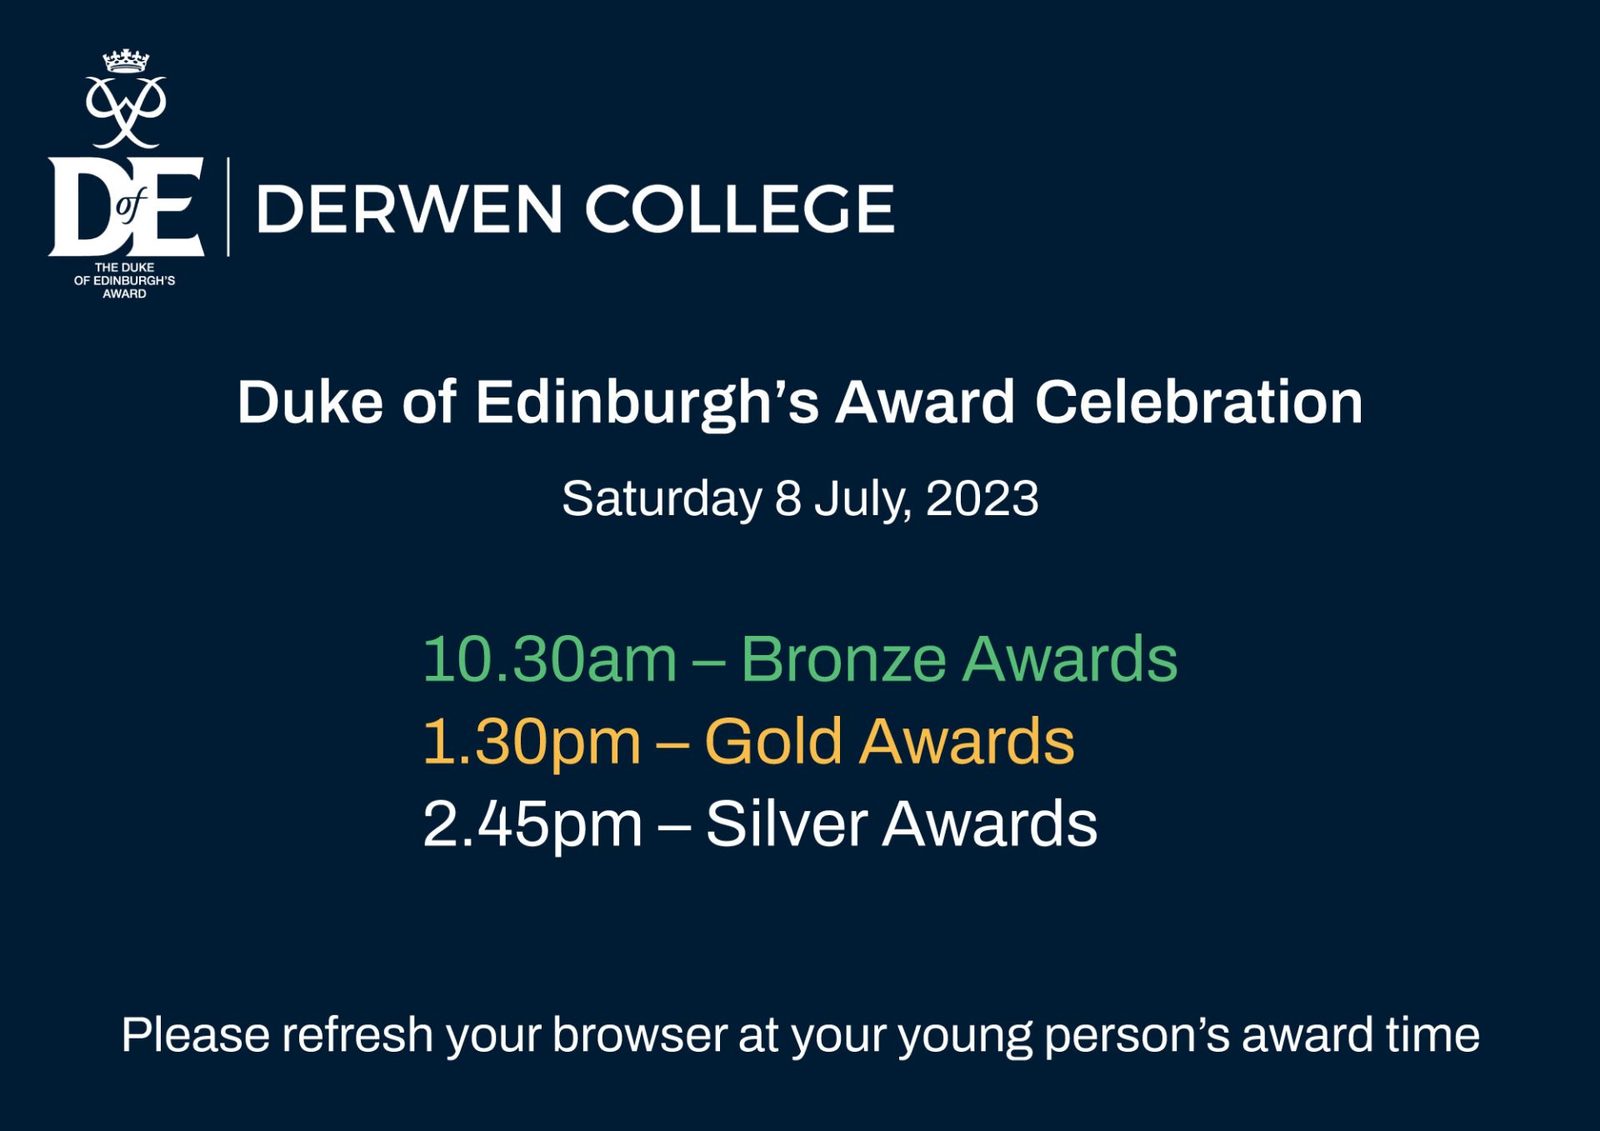 Duke of Edinburgh’s Award Celebration Saturday 8 July, 2023 10.30am – Bronze Awards Please refresh your browser at your young person’s award time. 1.30pm – Gold Awards 2.45pm – Silver Awards